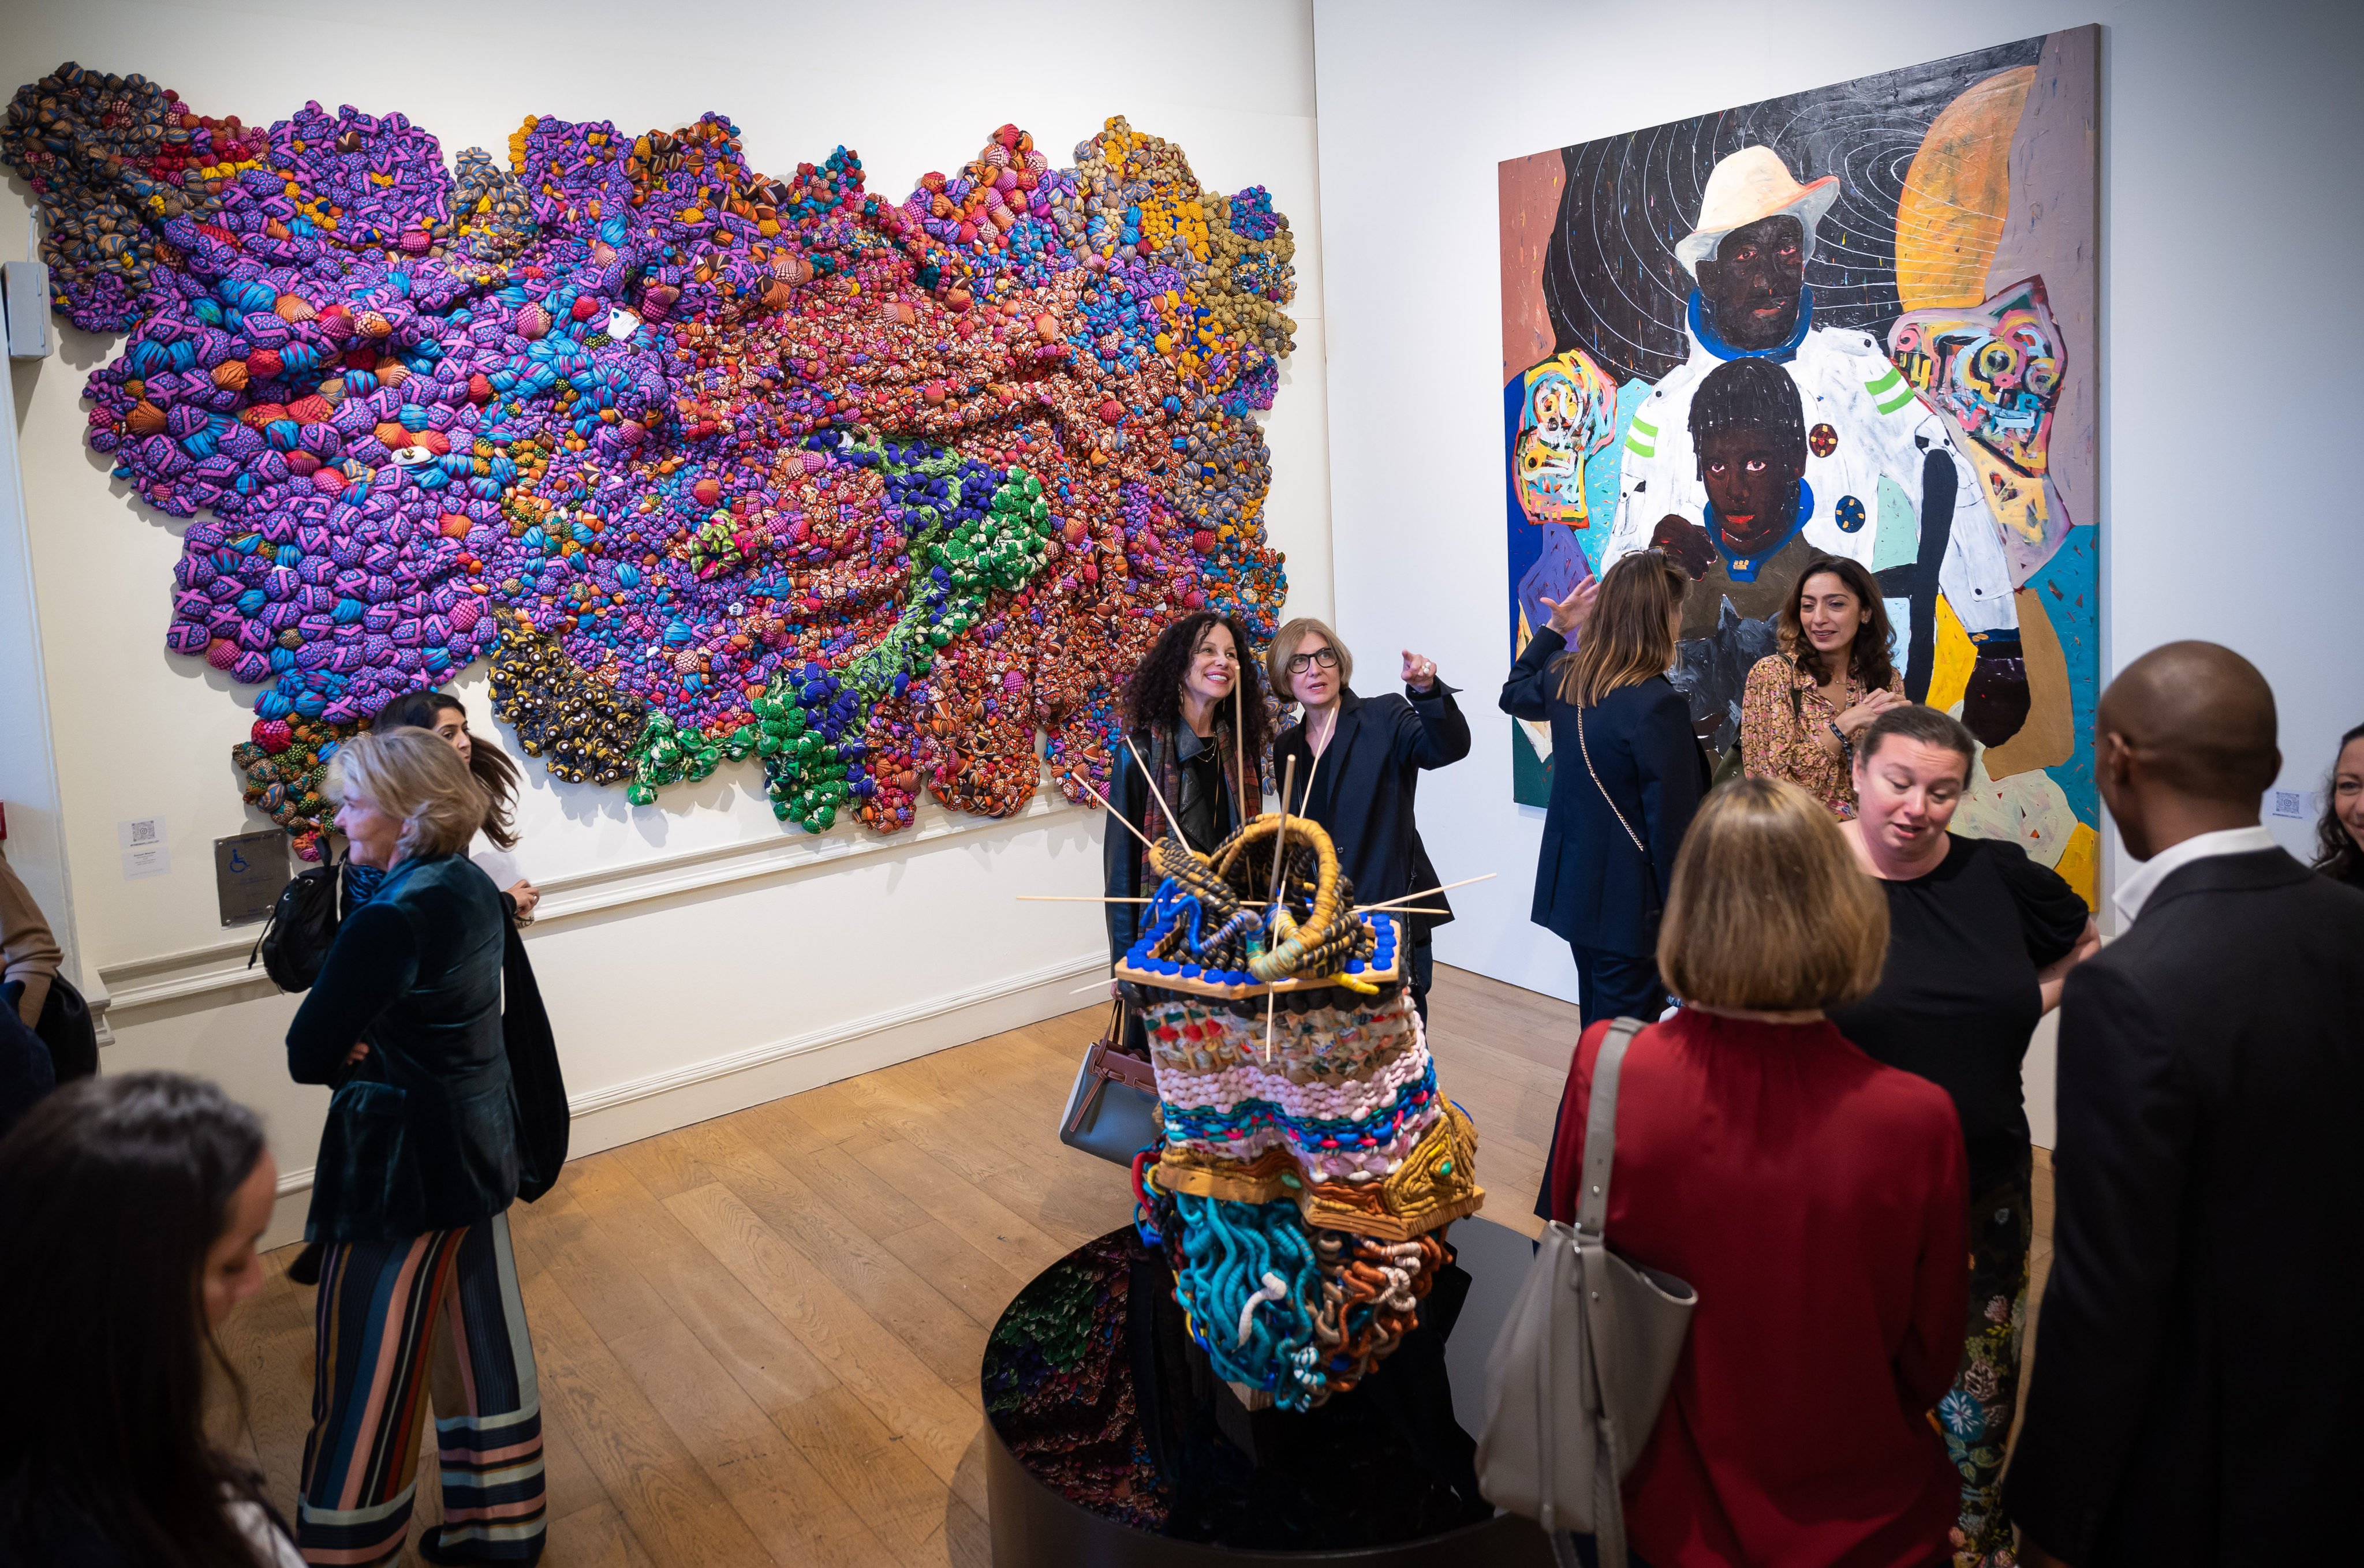 The VIP preview of the 1-54 African art fair in London on October 12, 2023. The fair will make its Hong Kong debut with a small-scale selling exhibition at Christie’s in March 2024, which 1-54’s founder Touria El Glaoui hopes will be followed by a full-scale fair in 2025. Photo: courtesy of 1-54